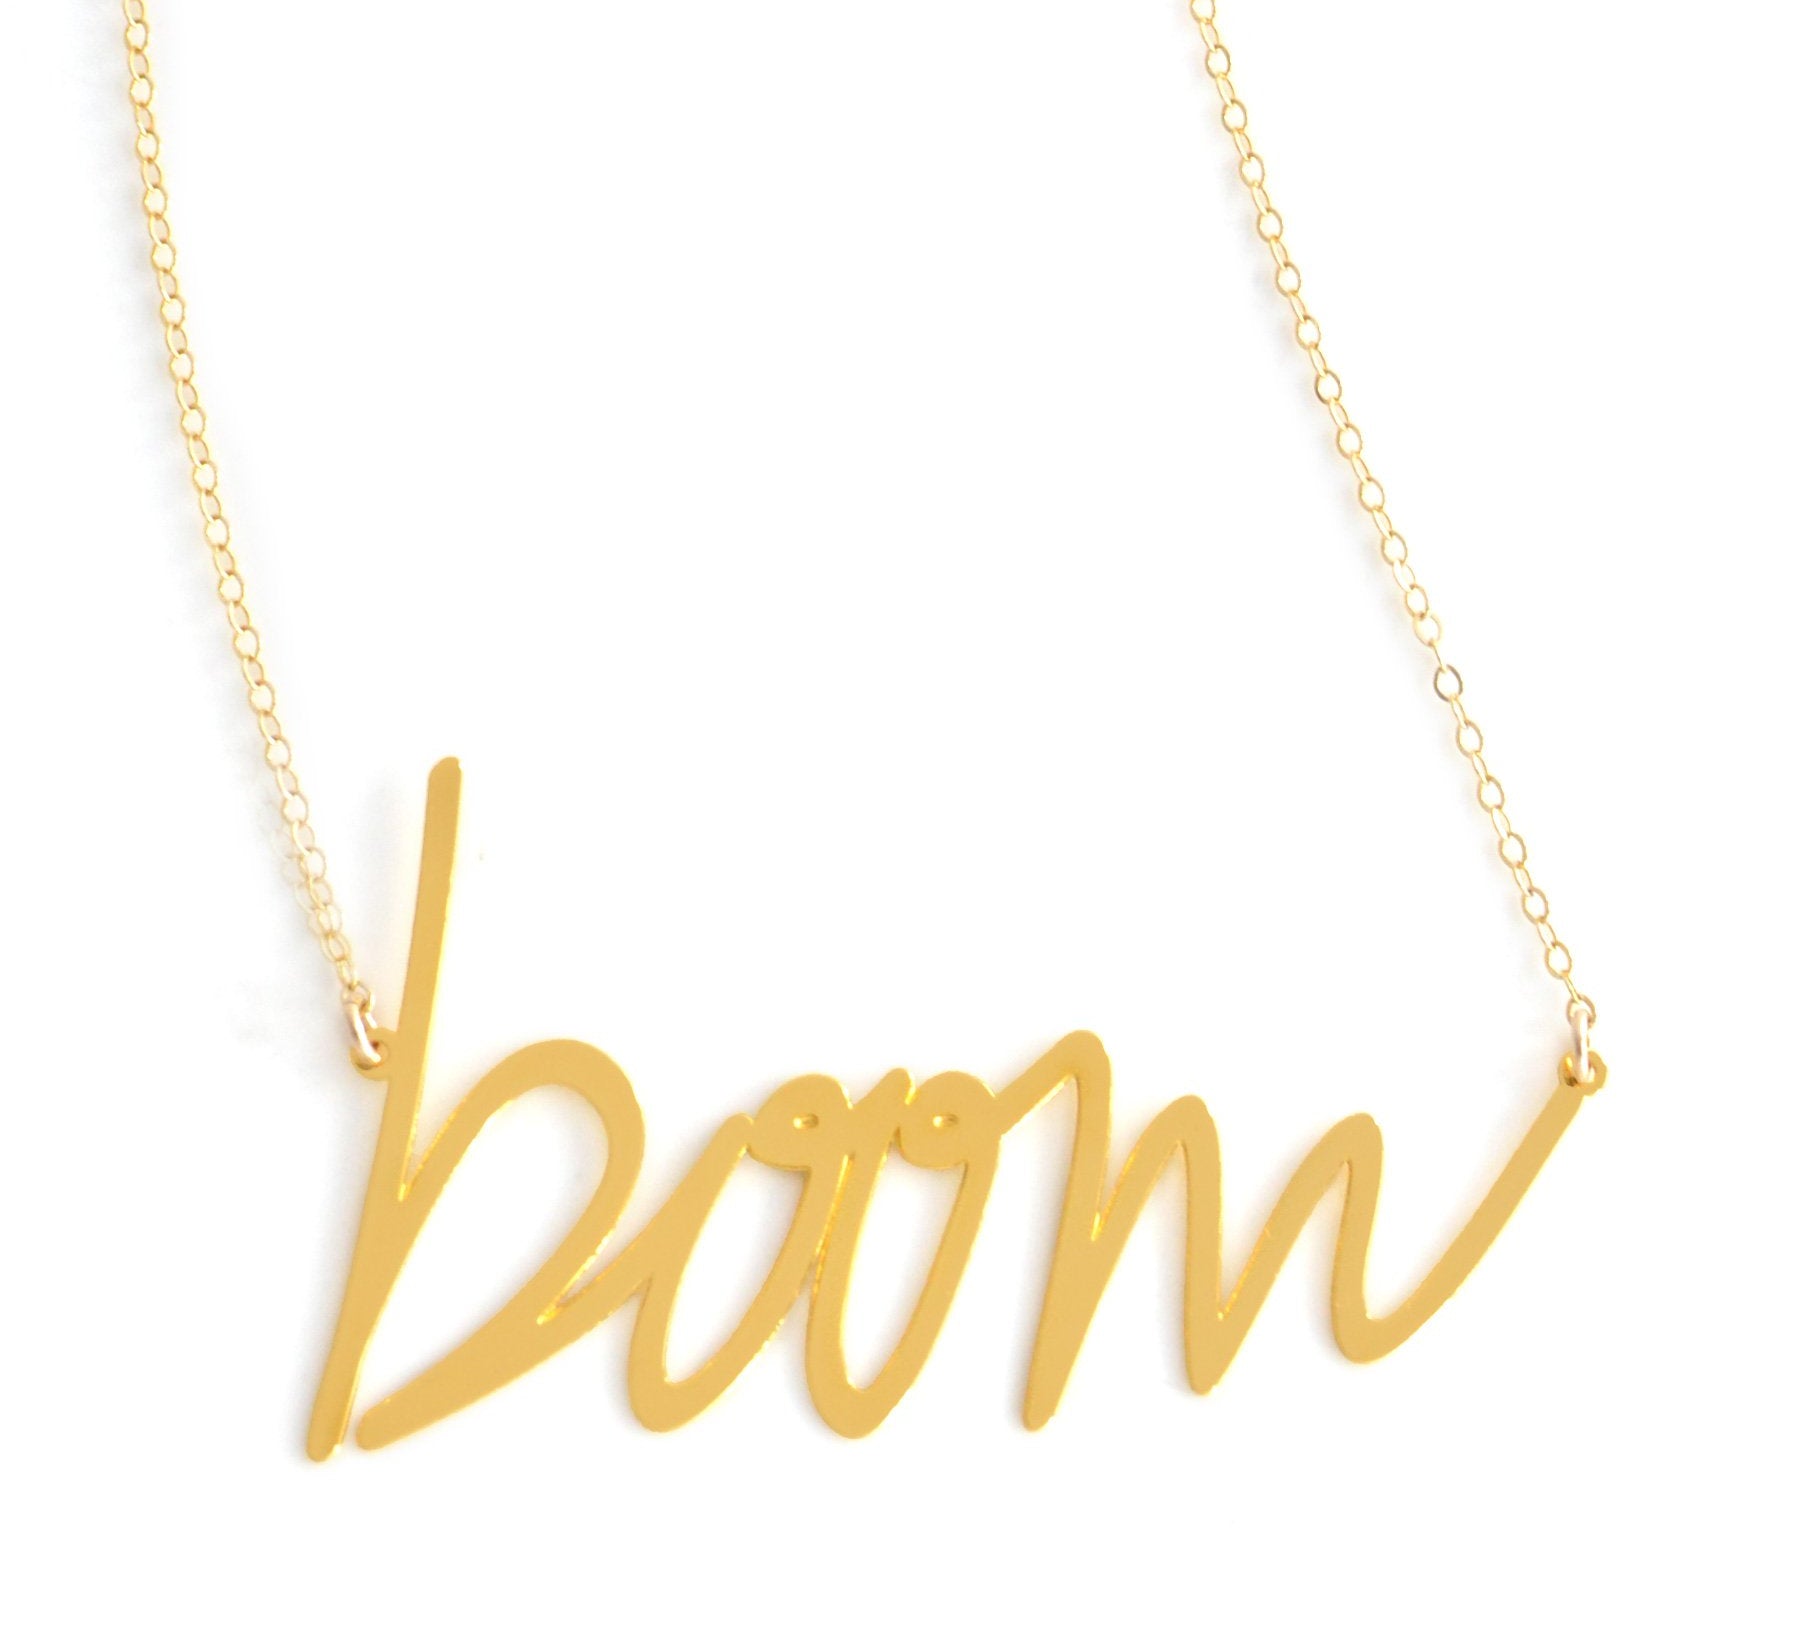 Boom Necklace - High Quality, Affordable, Hand Written, Self Love, Mantra Word Necklace - Available in Gold and Silver - Small and Large Sizes - Made in USA - Brevity Jewelry